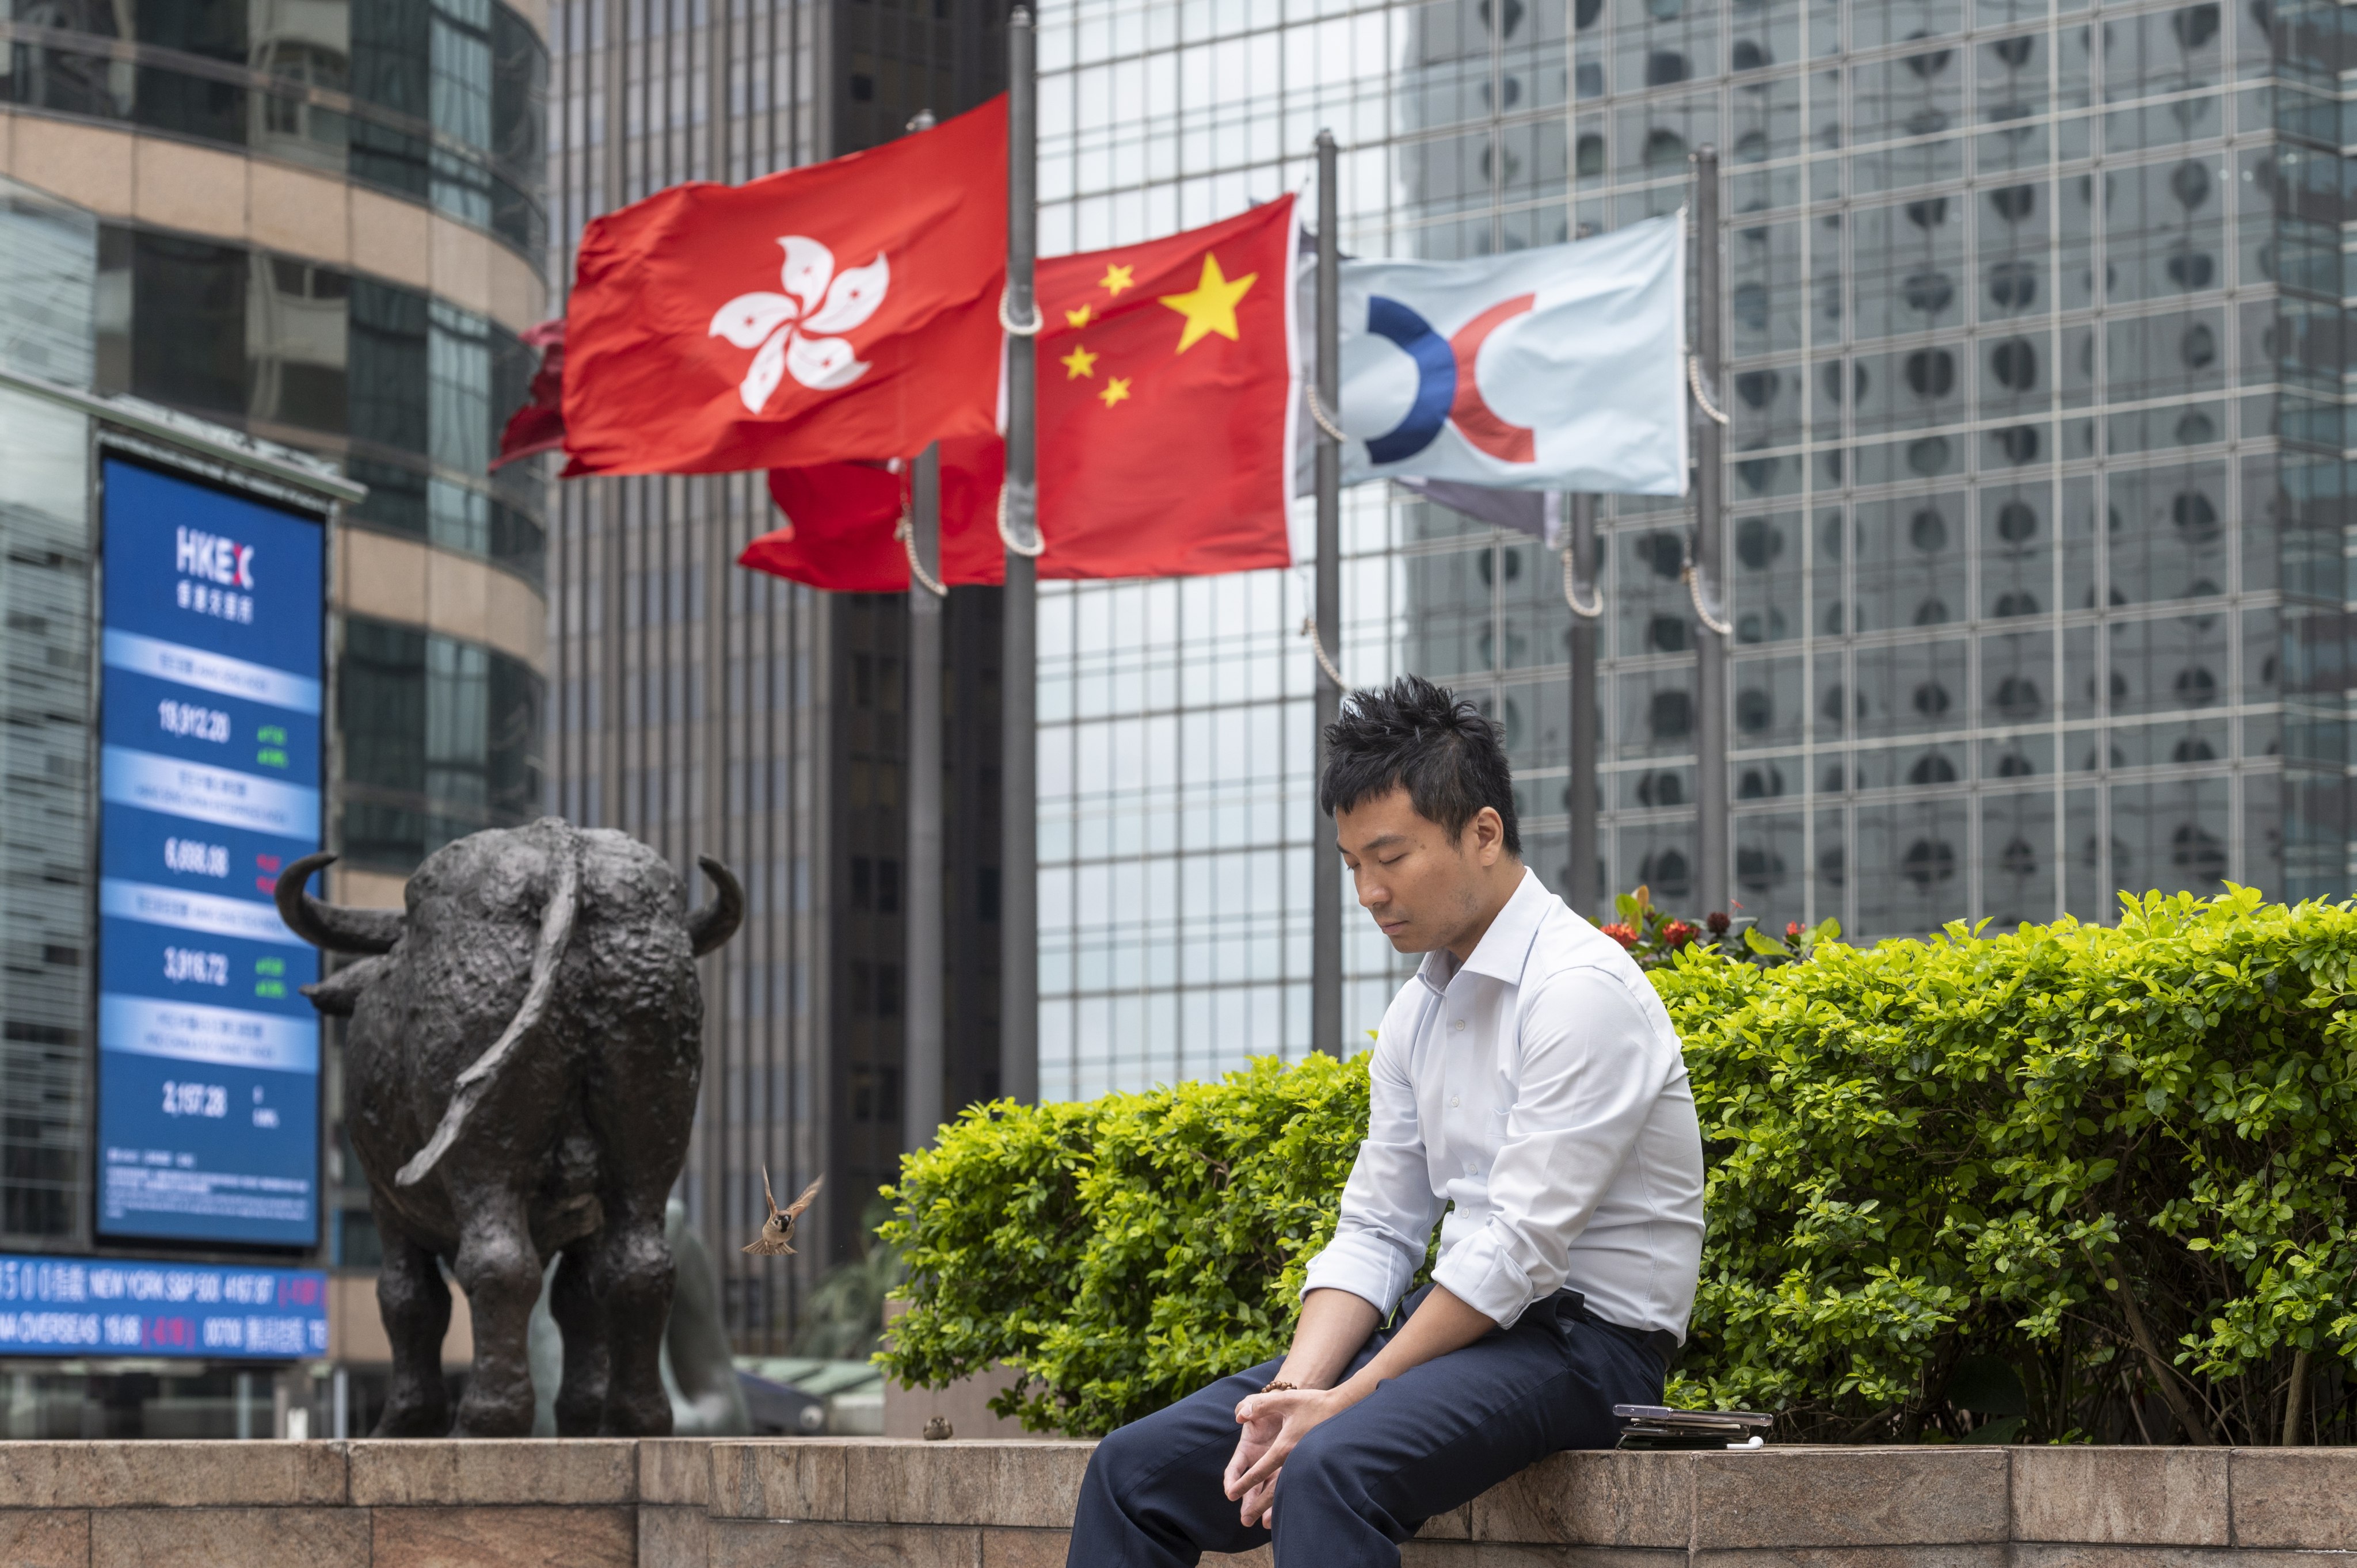 Hong Kong stocks rose on Tuesday after a four-day sell-off pushed the city’s benchmark to the lowest level since March 7. Photo: EPA-EFE